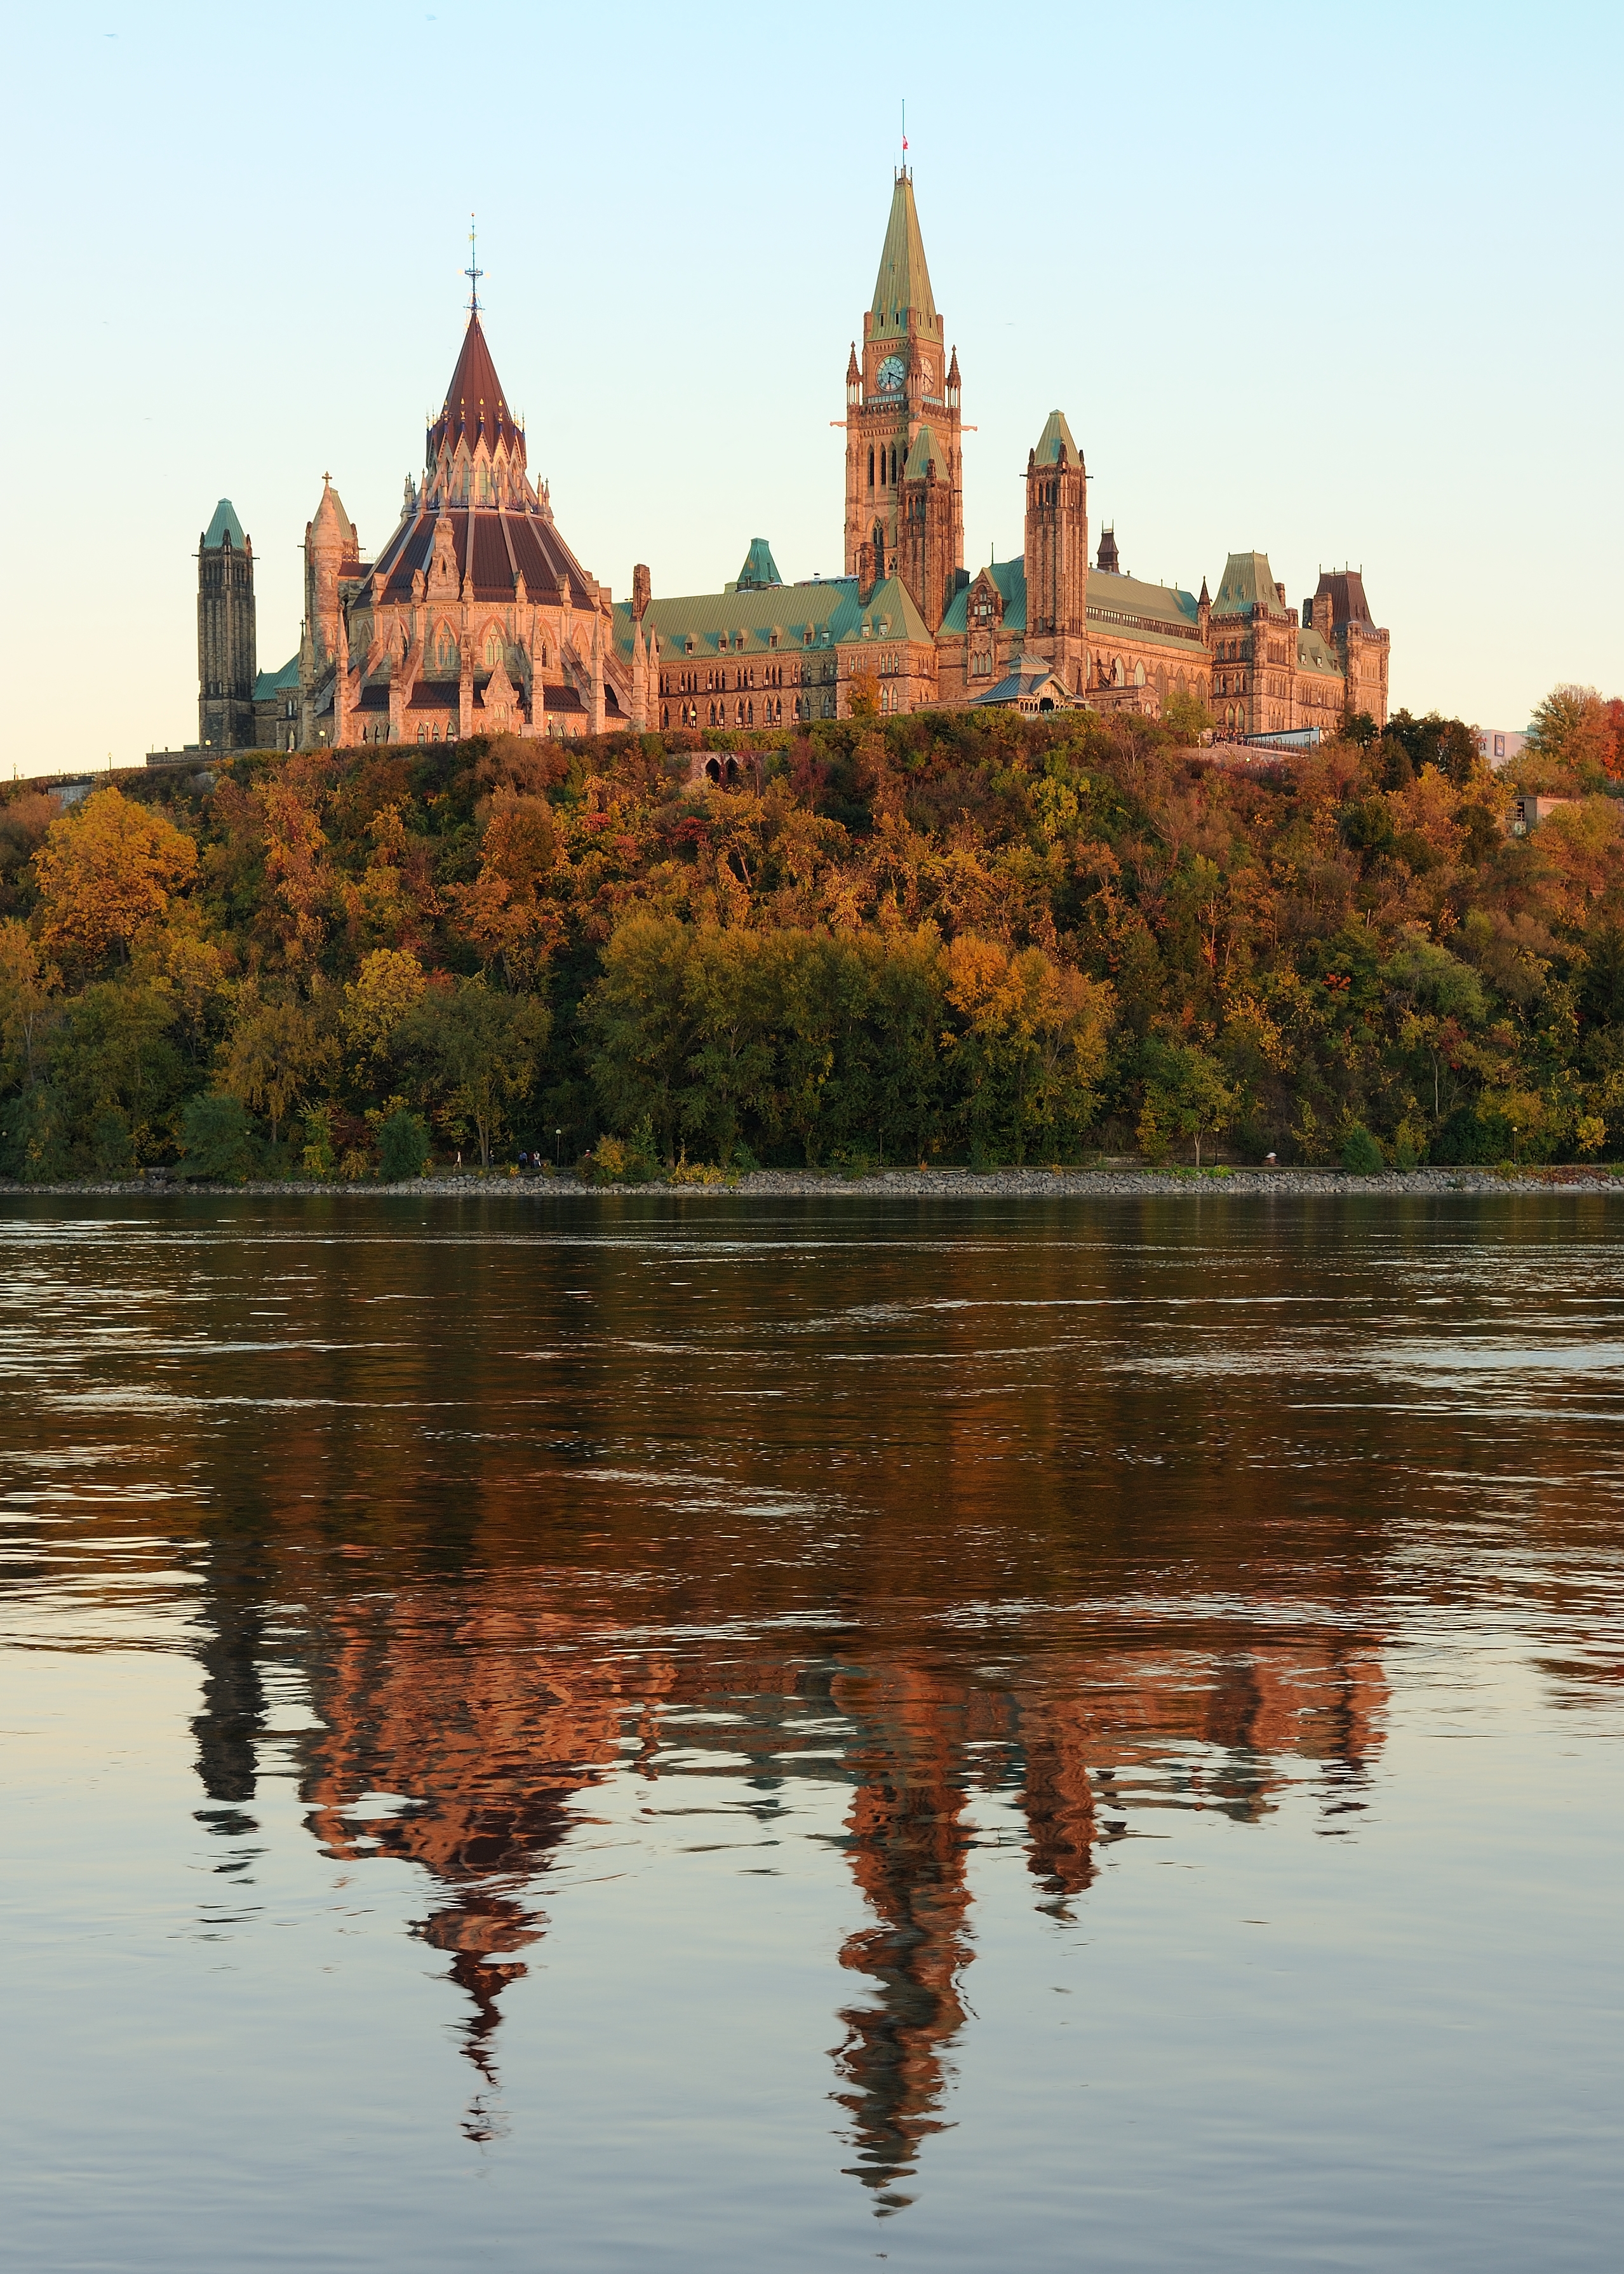 Centre Block and Library of Parliament